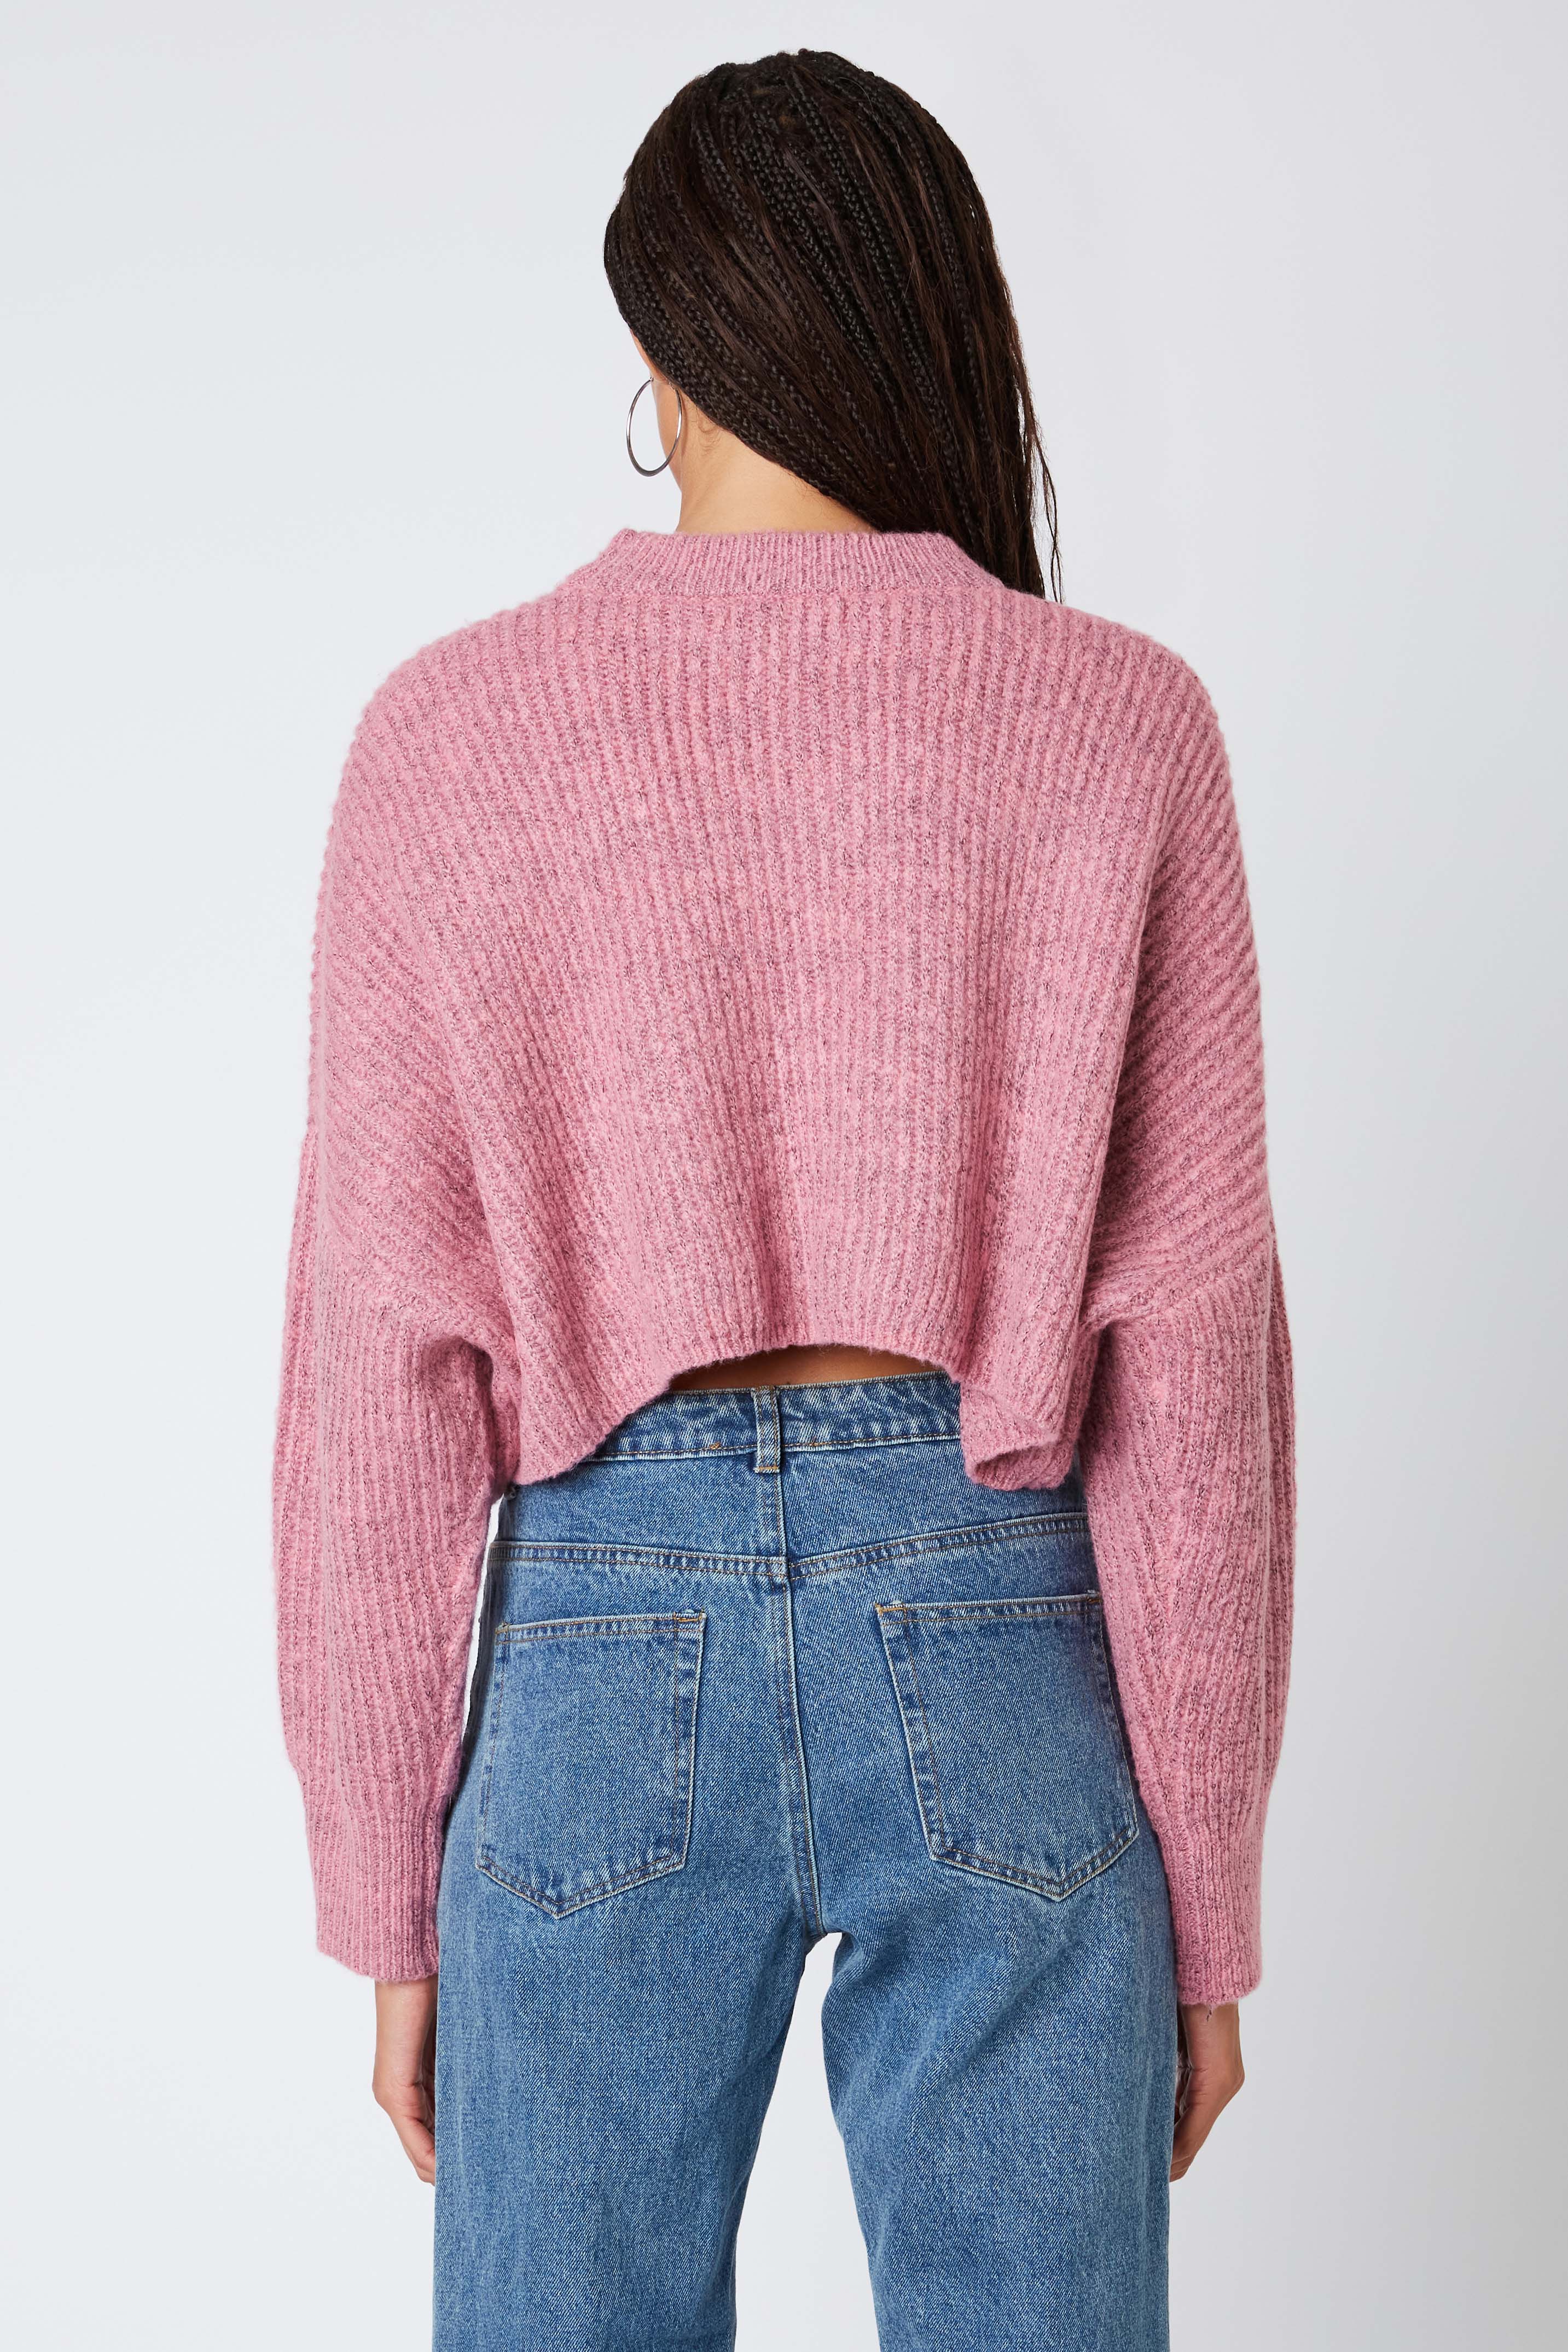 Cropped Mockneck Sweater in Pink Back View